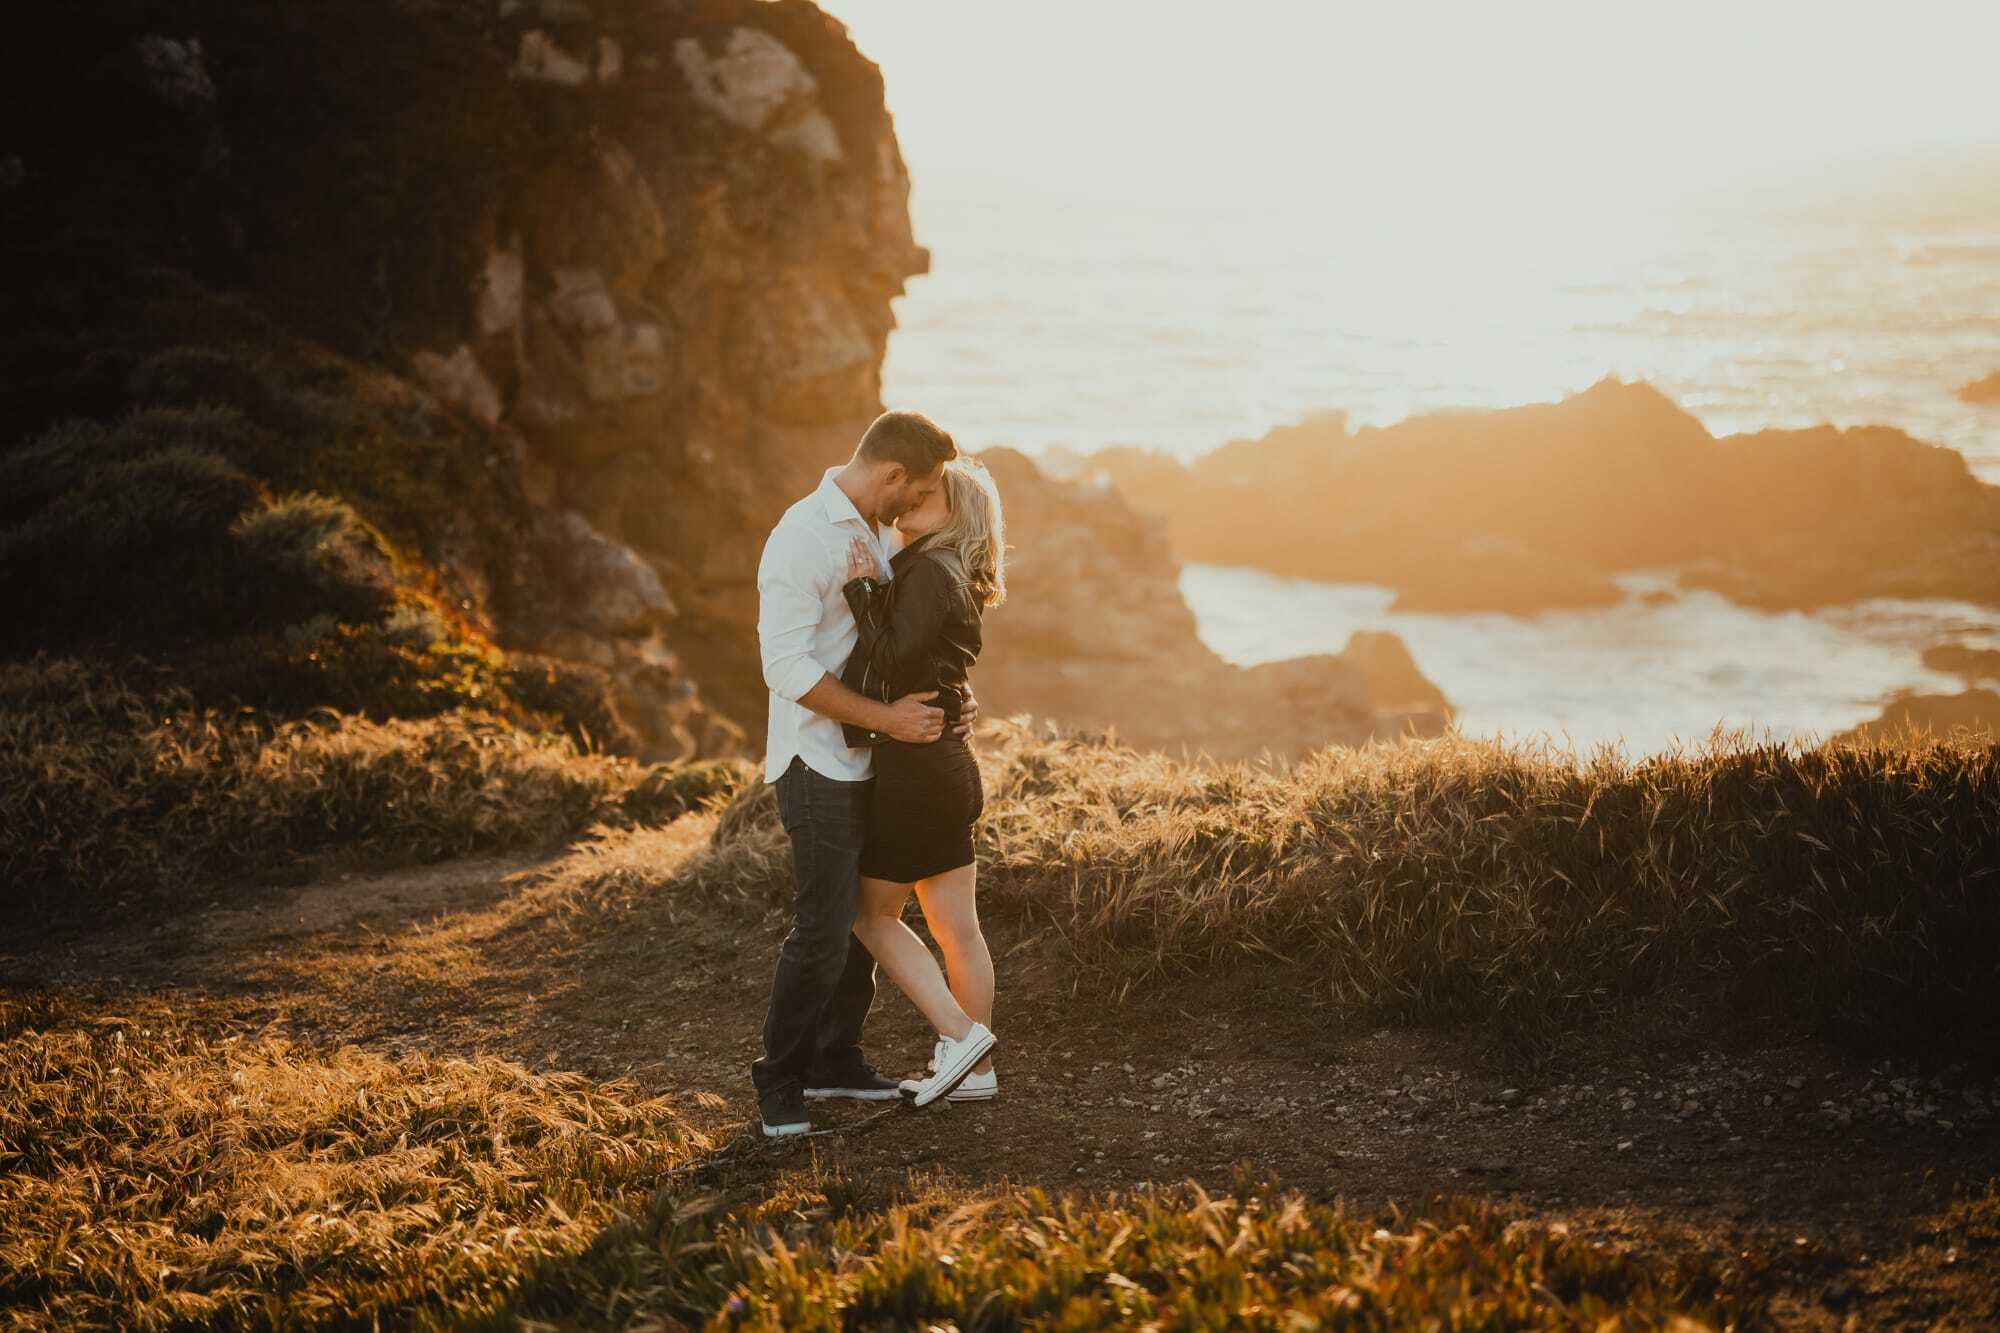 Engagement and proposal photography